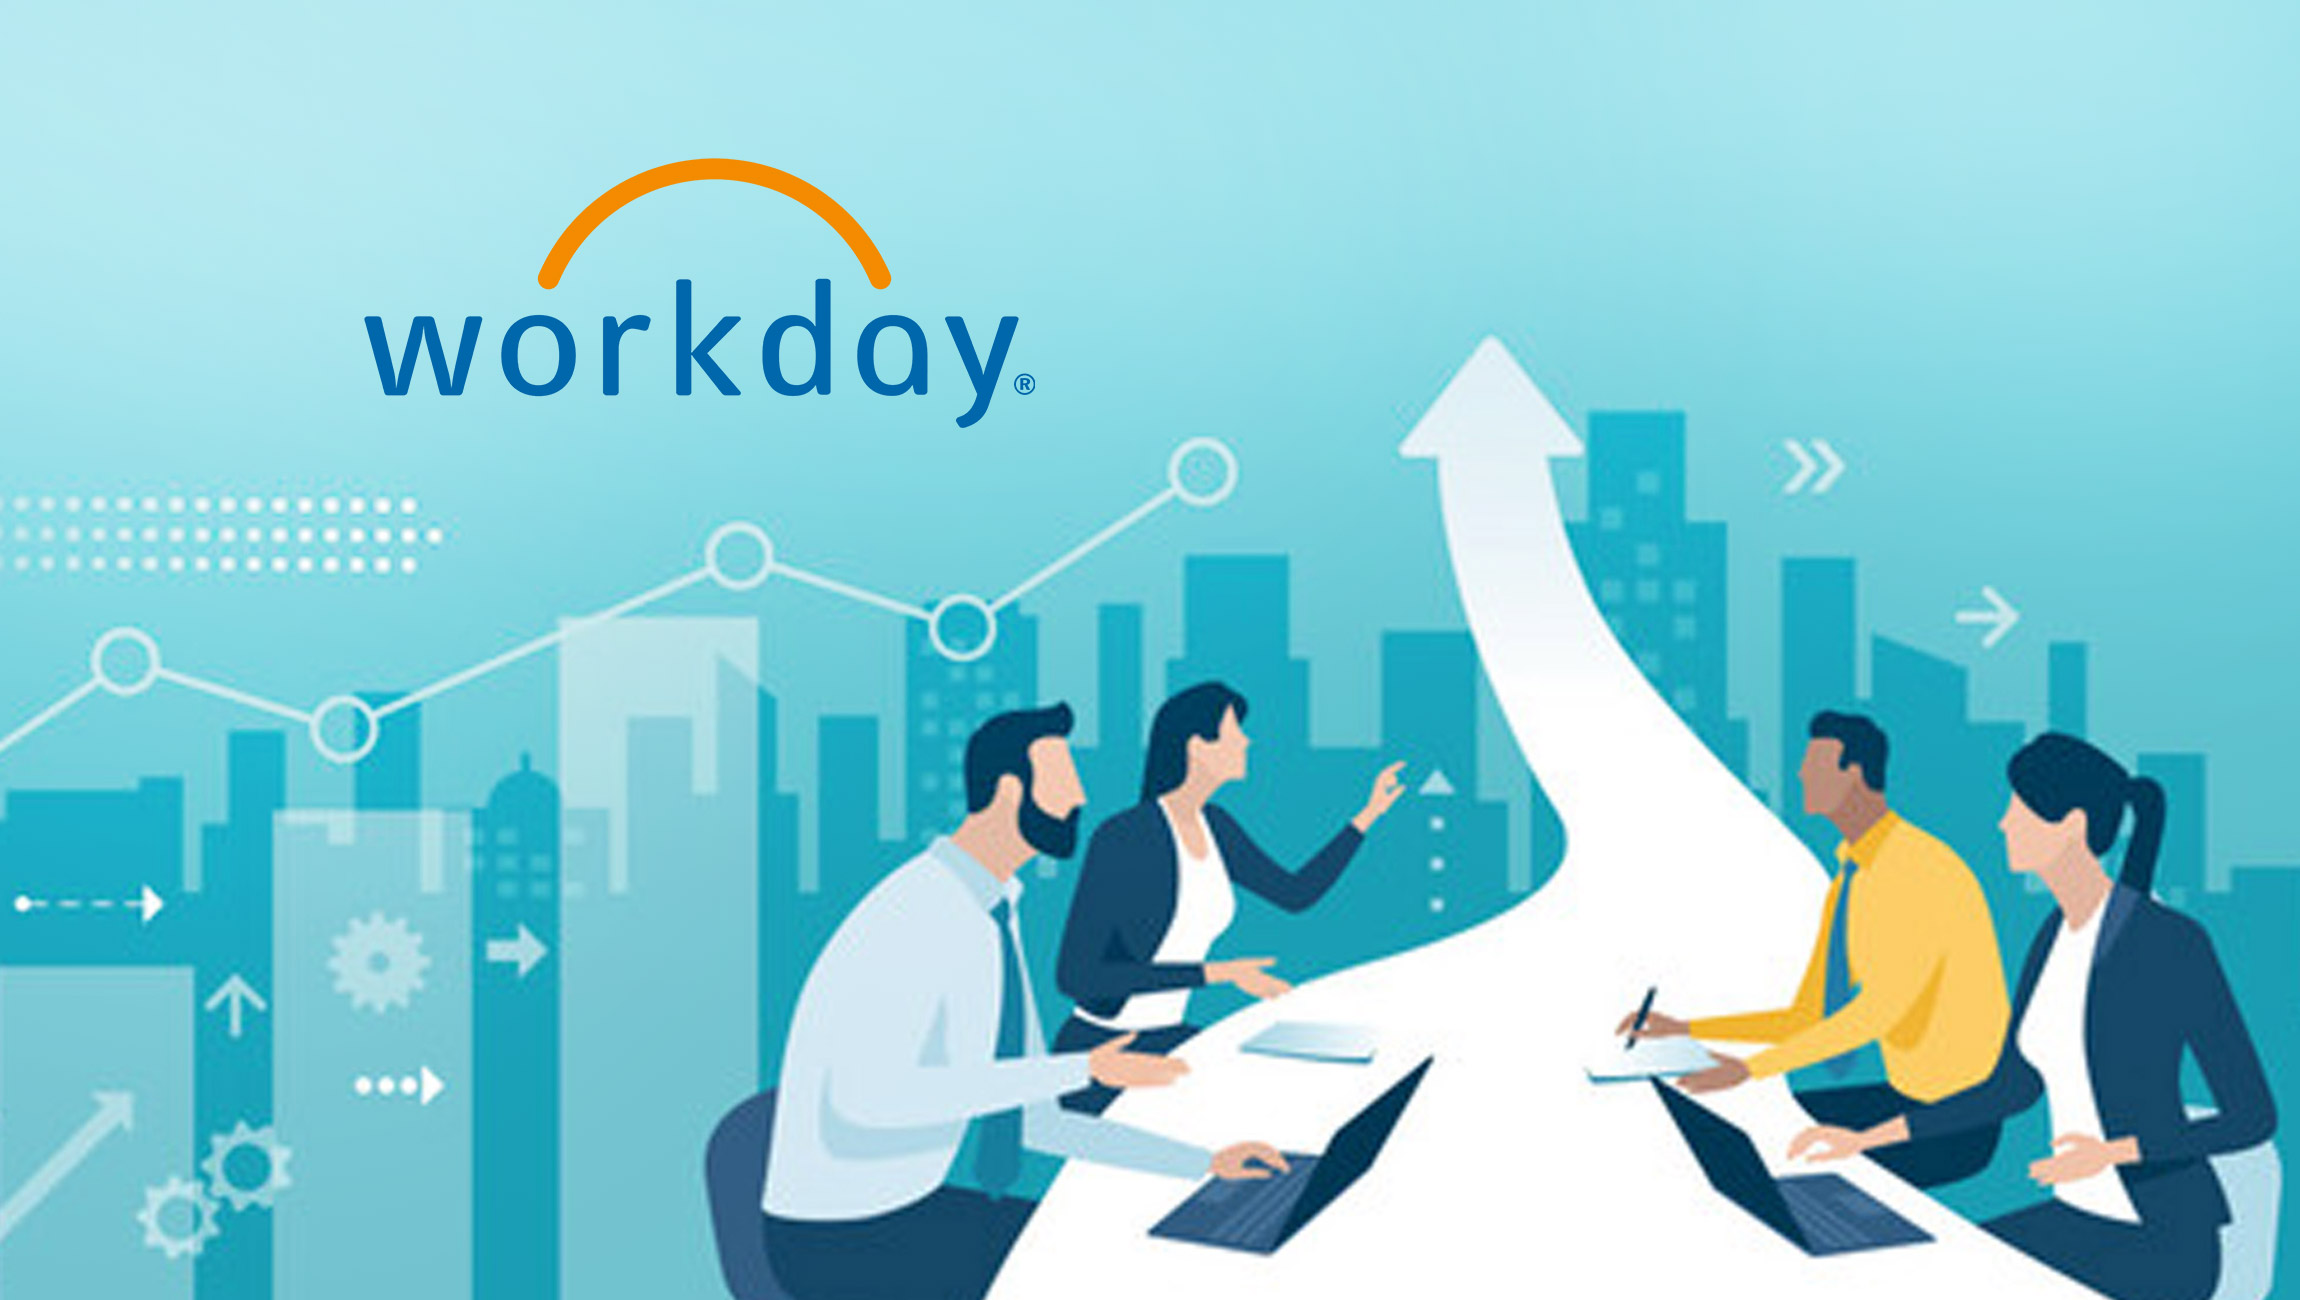 Workday Sees Continued Momentum Across Retail Industry, Empowering Global Organizations to Adapt to Evolving Business, Employee, and Consumer Needs